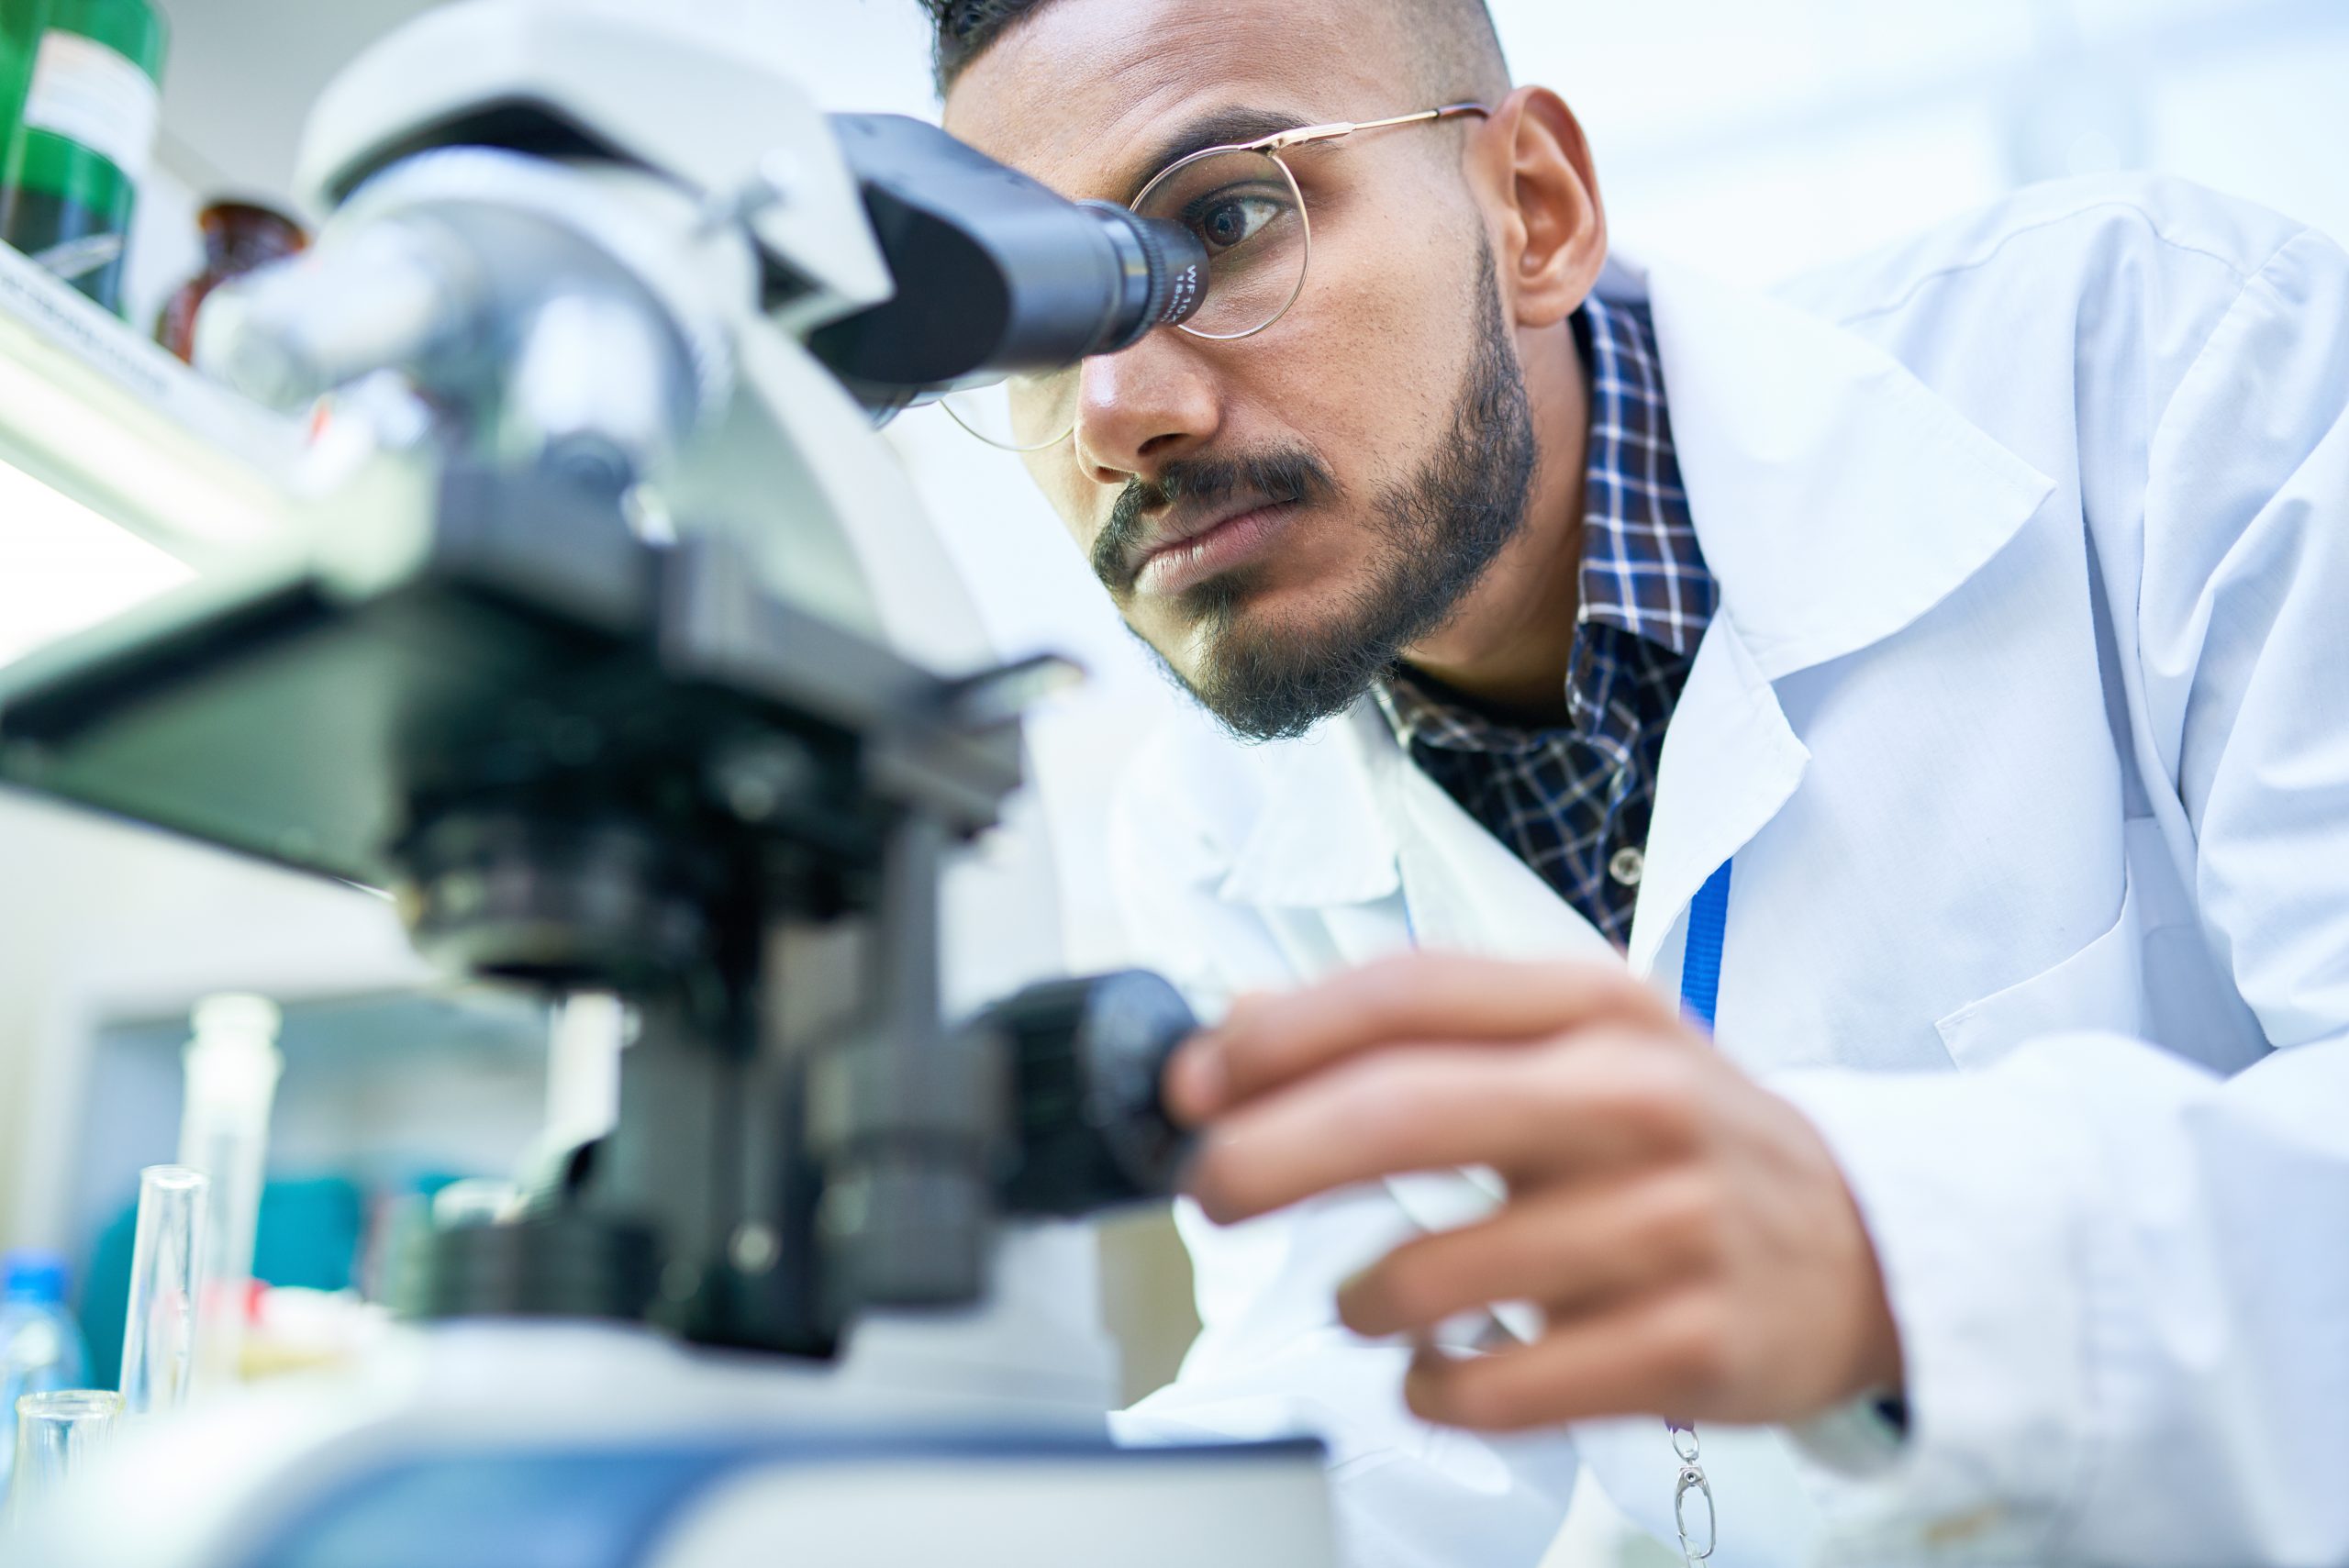 A bearded man with glasses gazes into a microscope in a lab